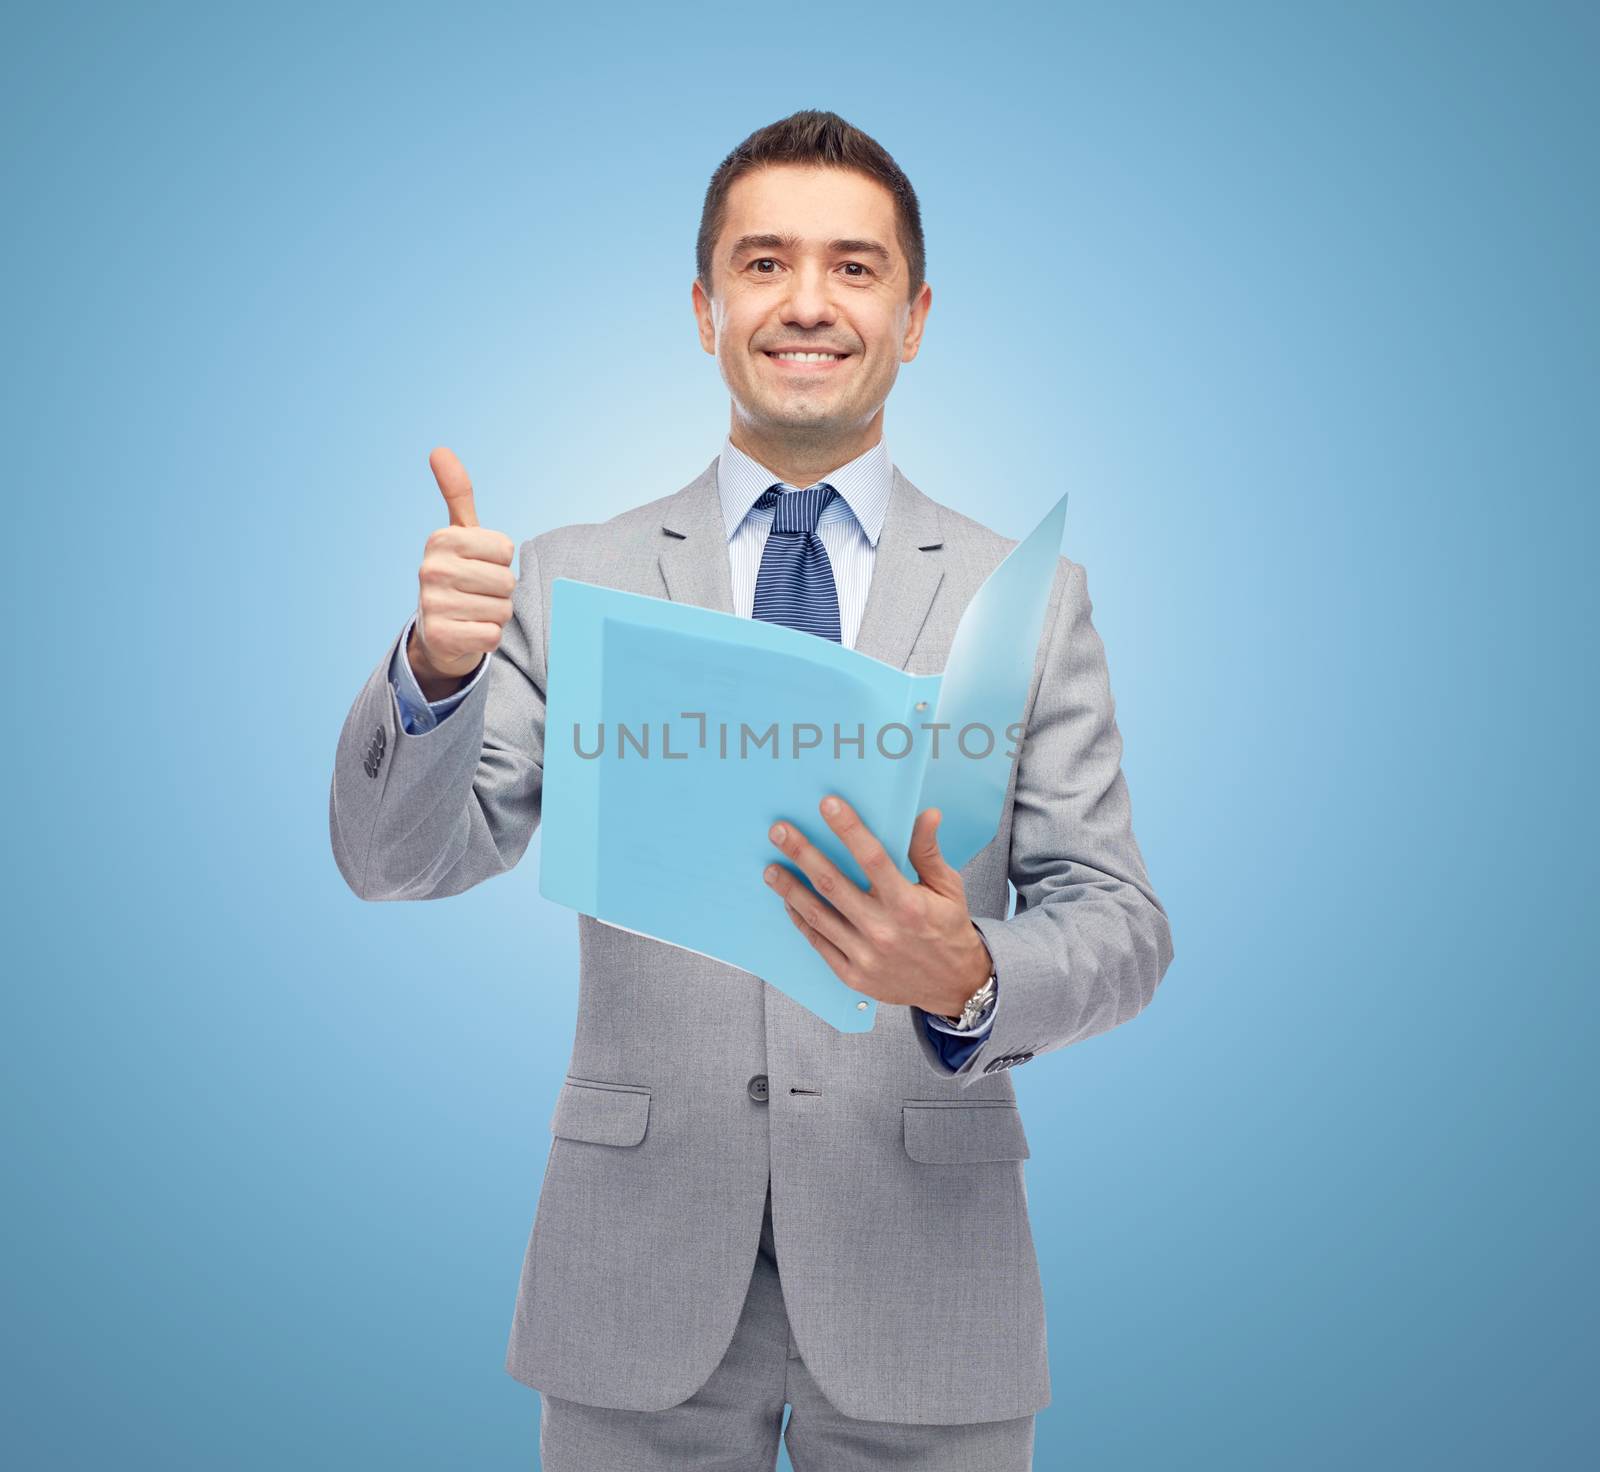 business, people, finances and paper work concept - happy smiling businessman in suit holding folder and showing thumbs up over blue background